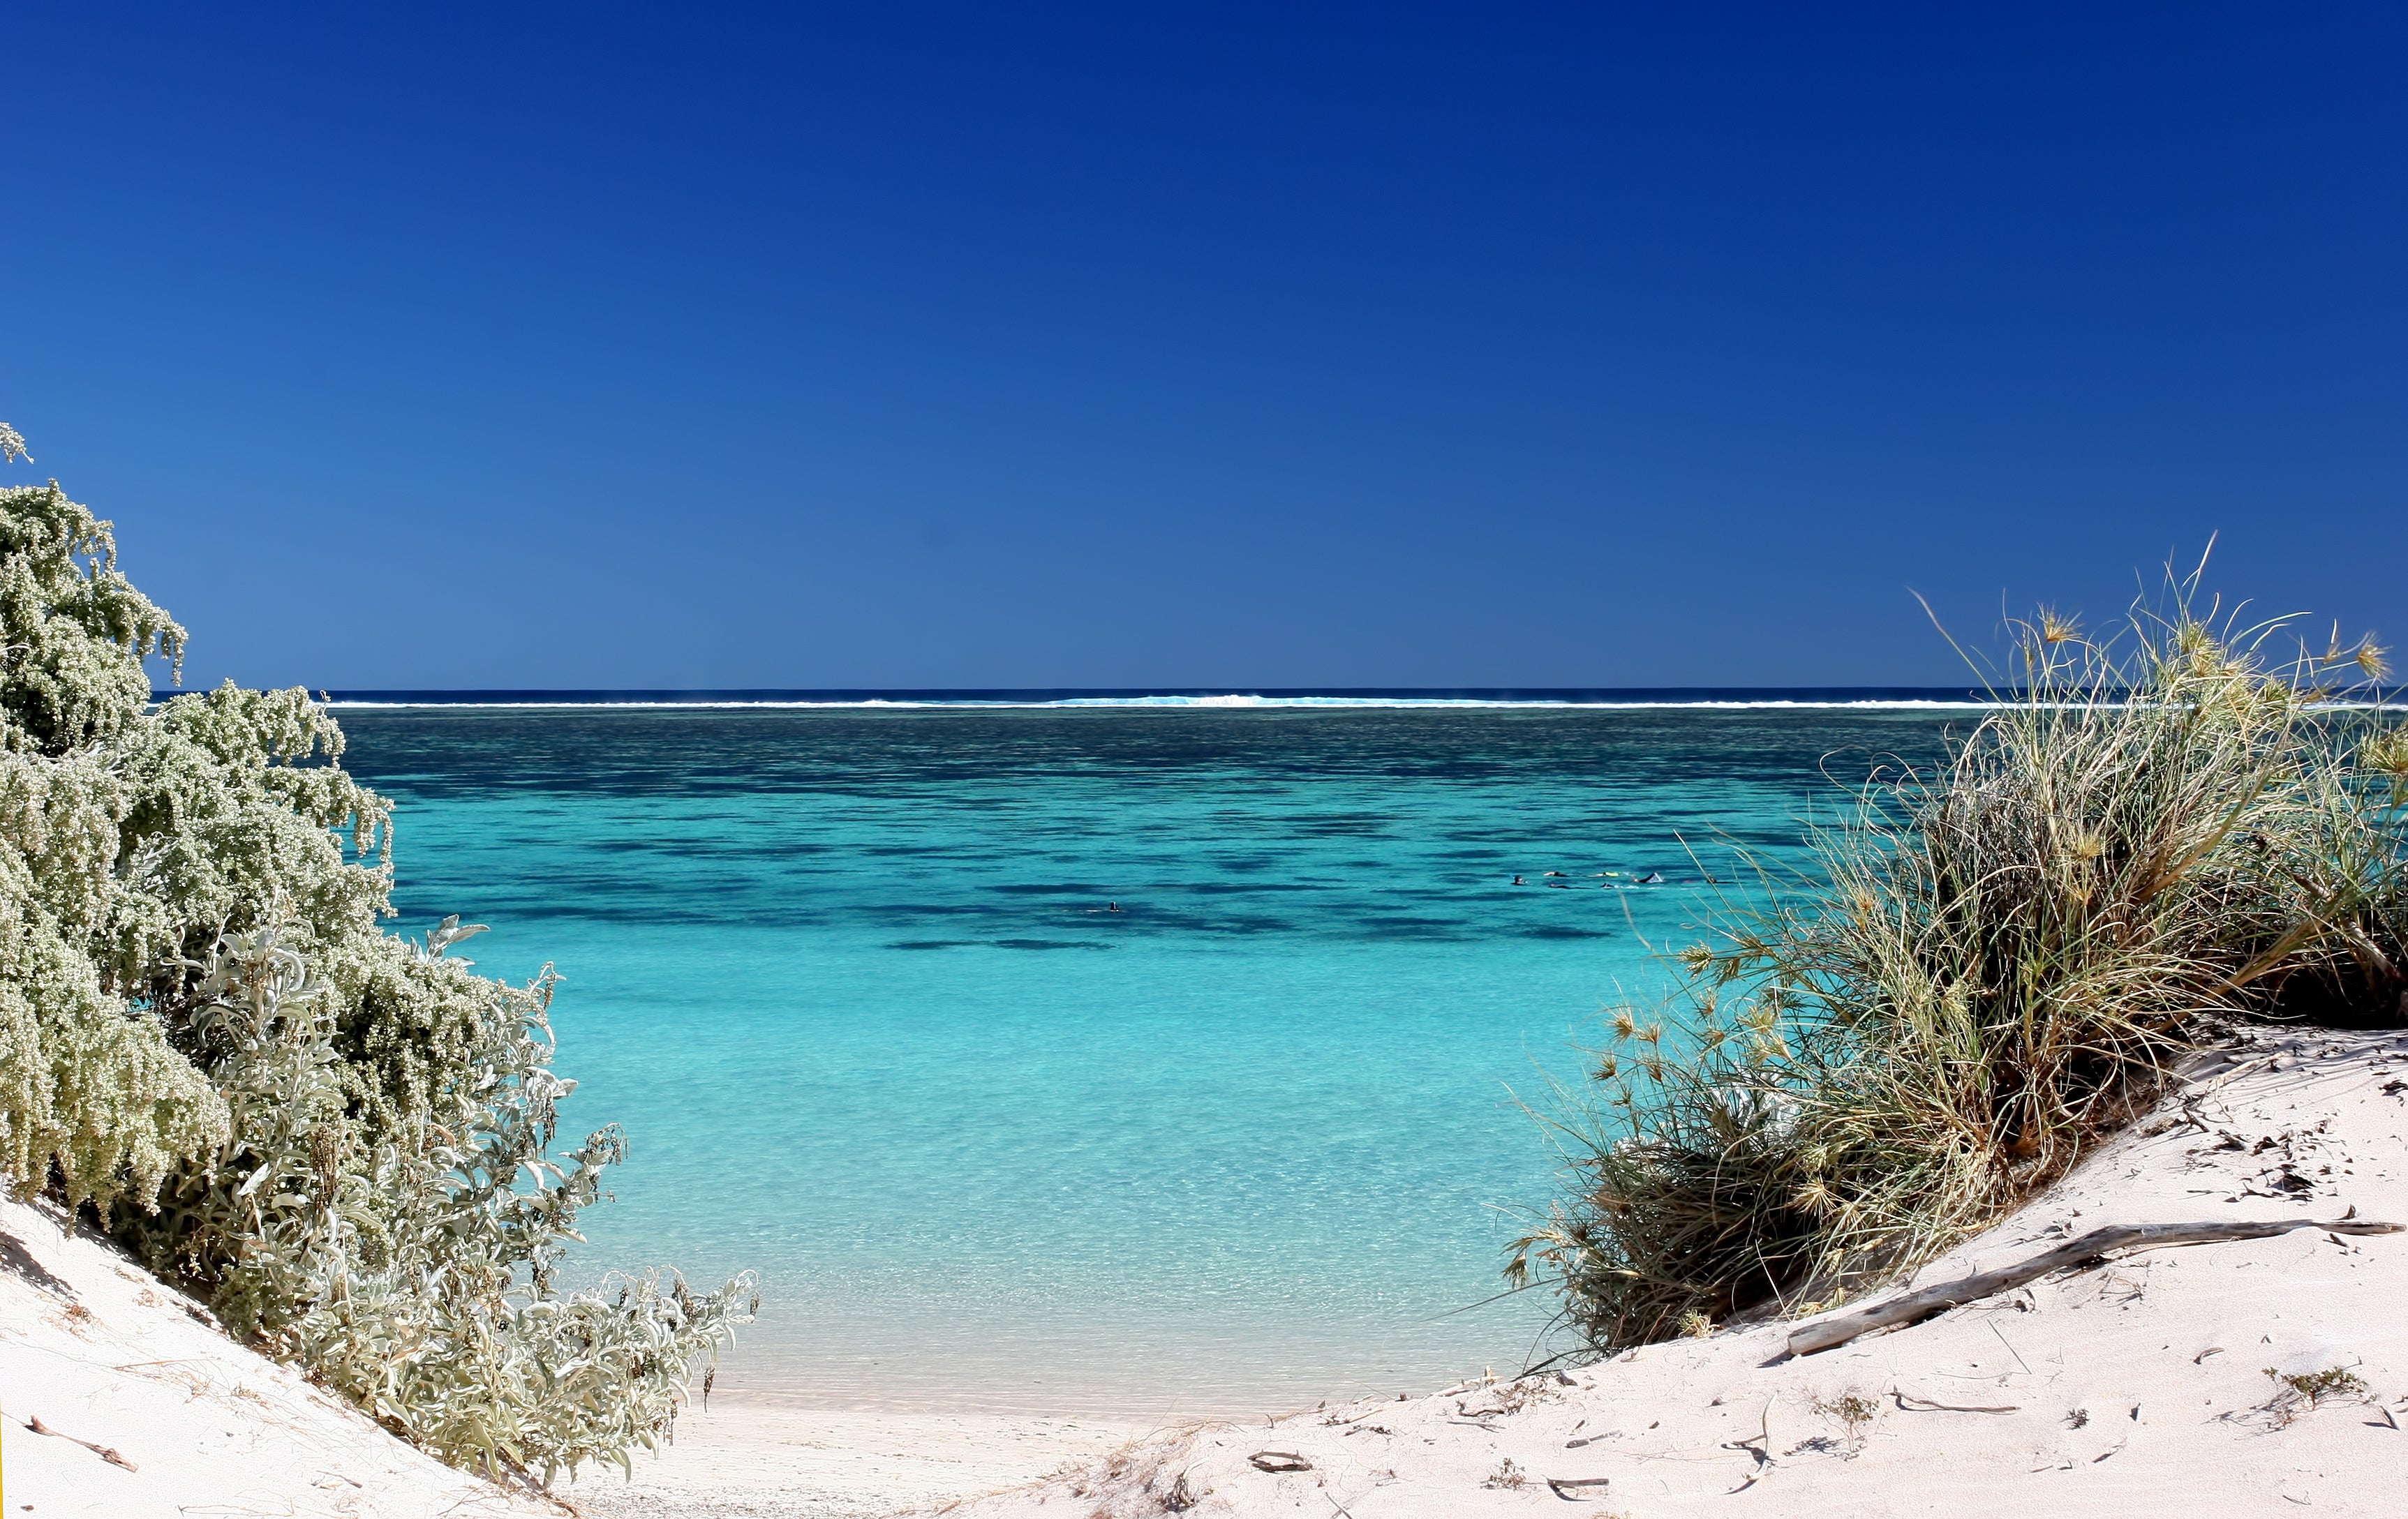 Ningaloo is great snorkelling territory